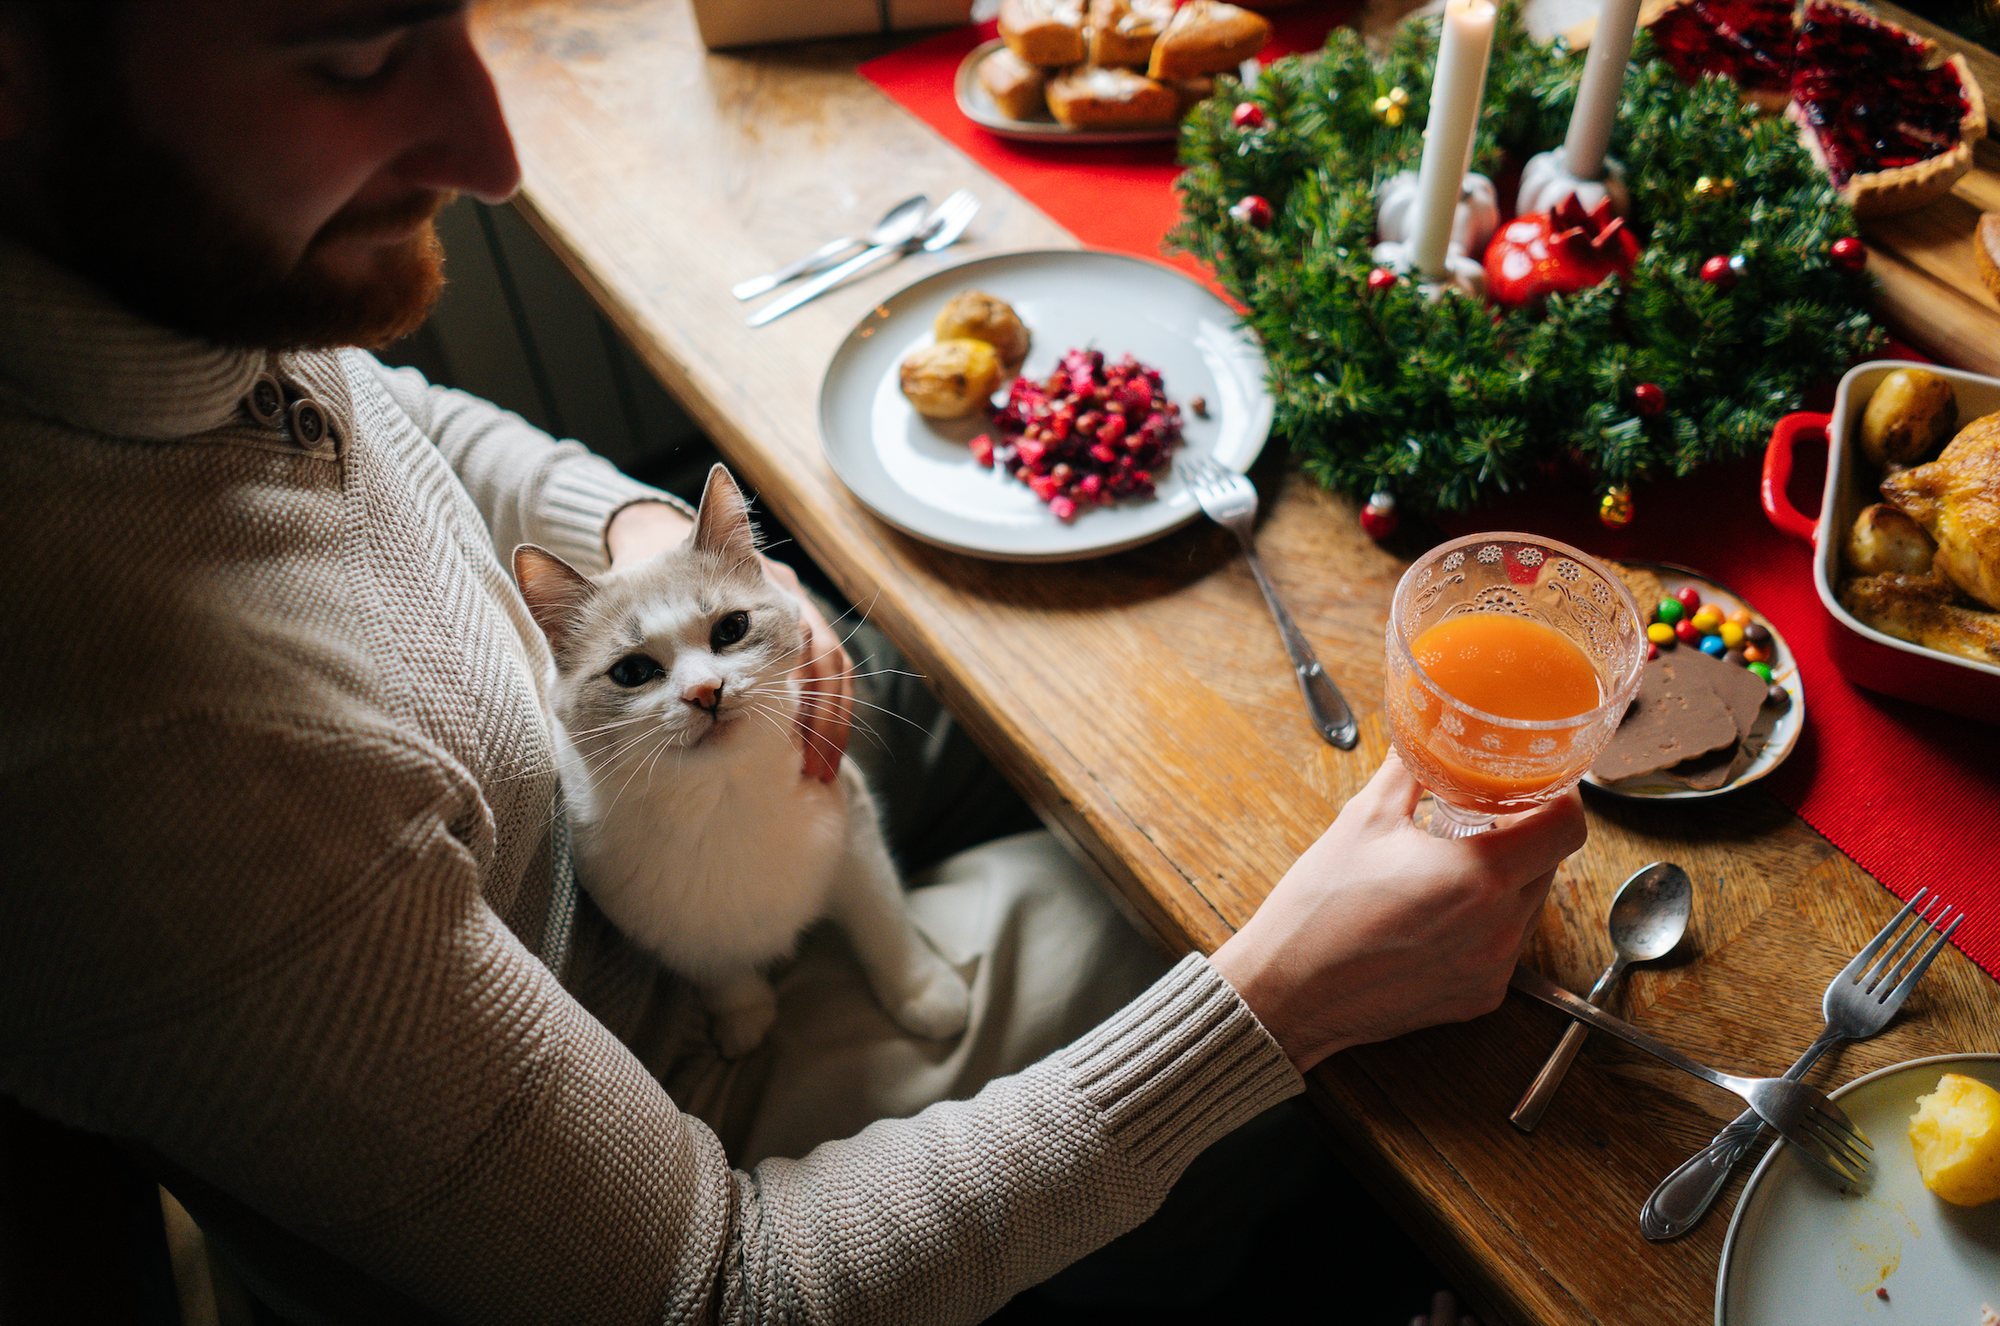 A man holding a glass of juice, petting a cat at a table.